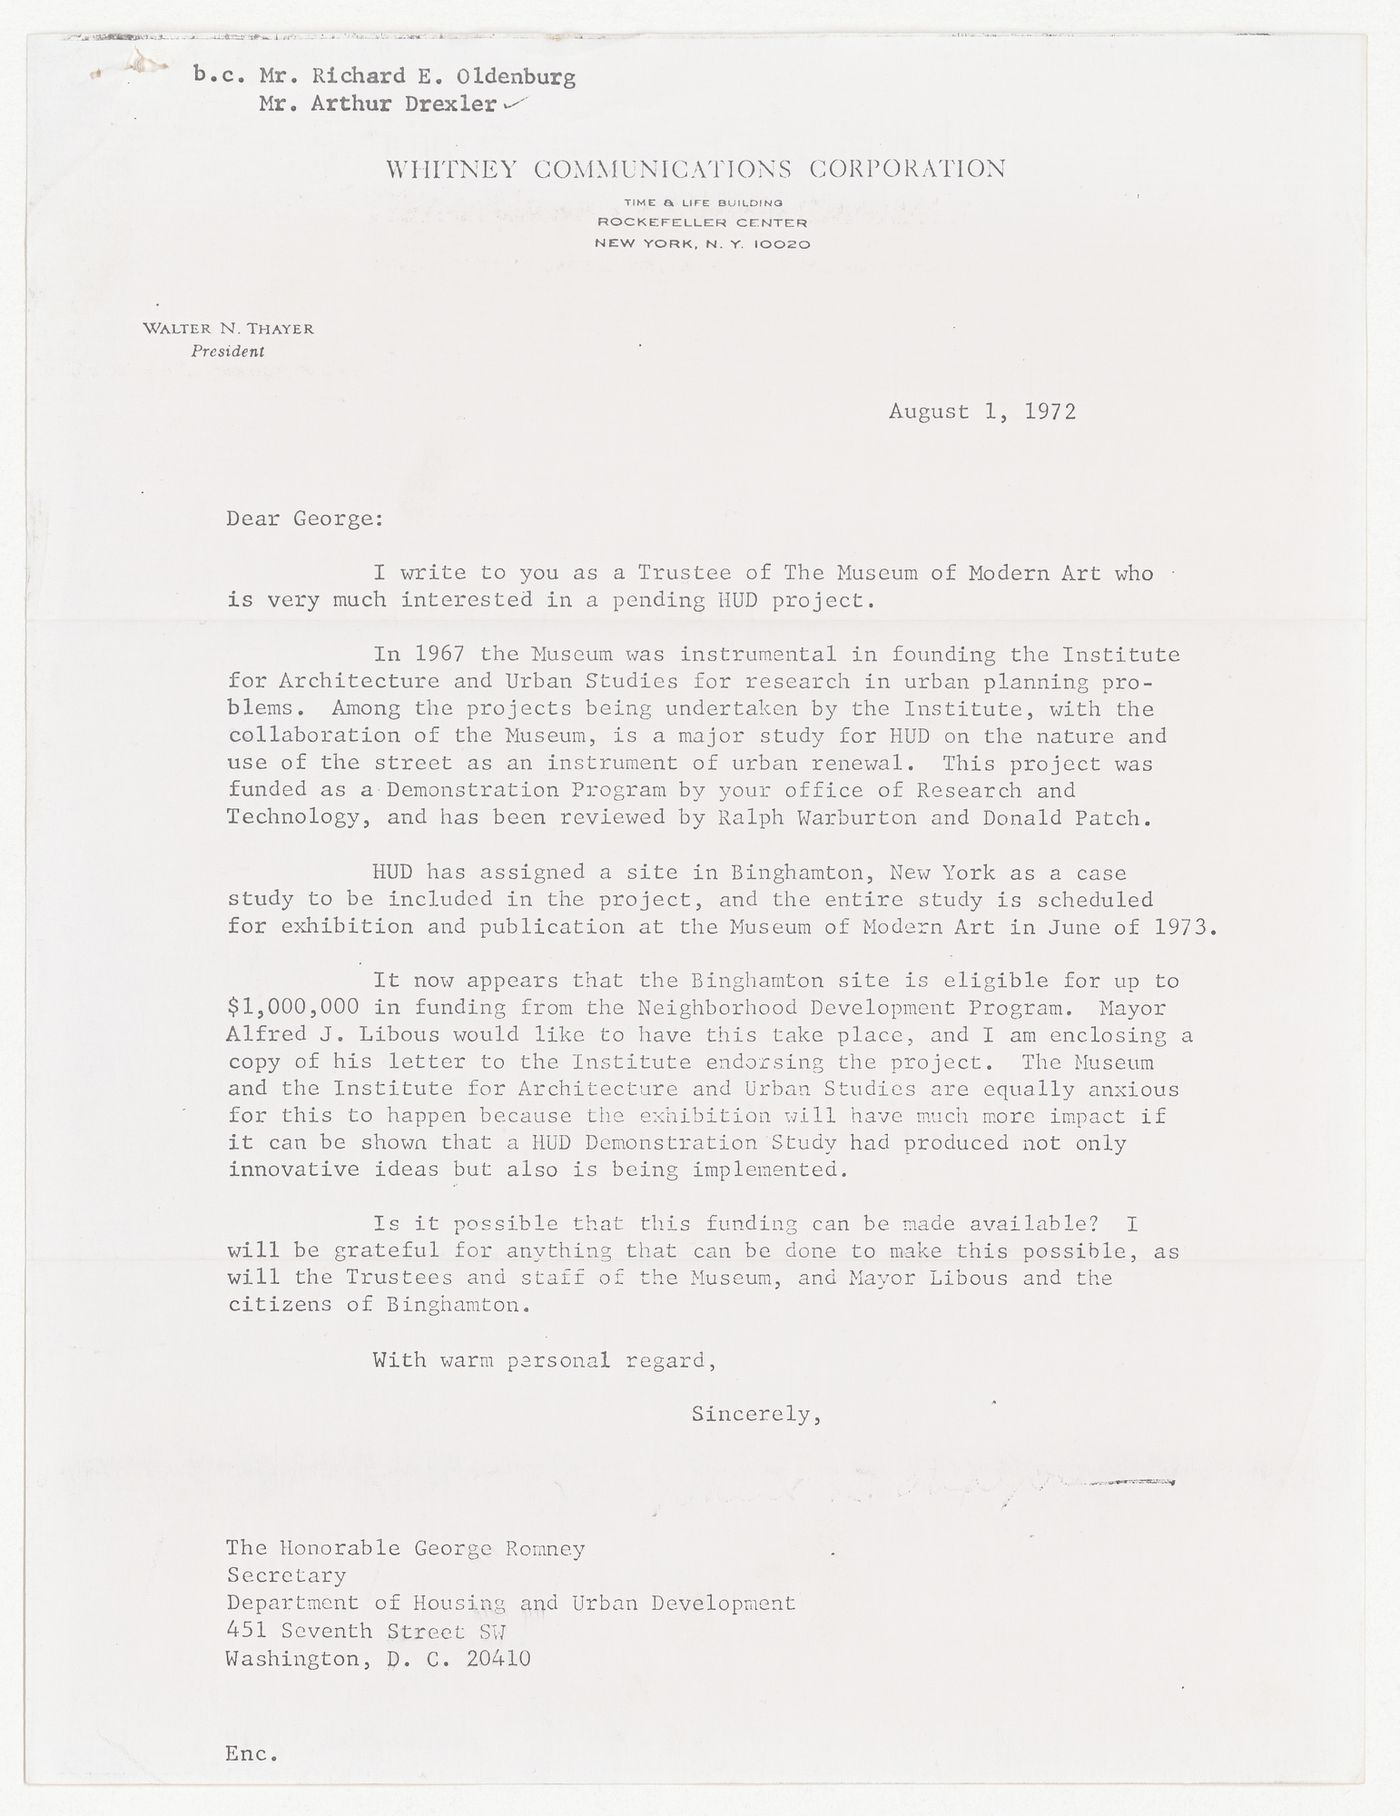 Letter from Arthur Drexler to Peter D. Eisenman with attached letter from Walther N. Thayer to George Romney about funding